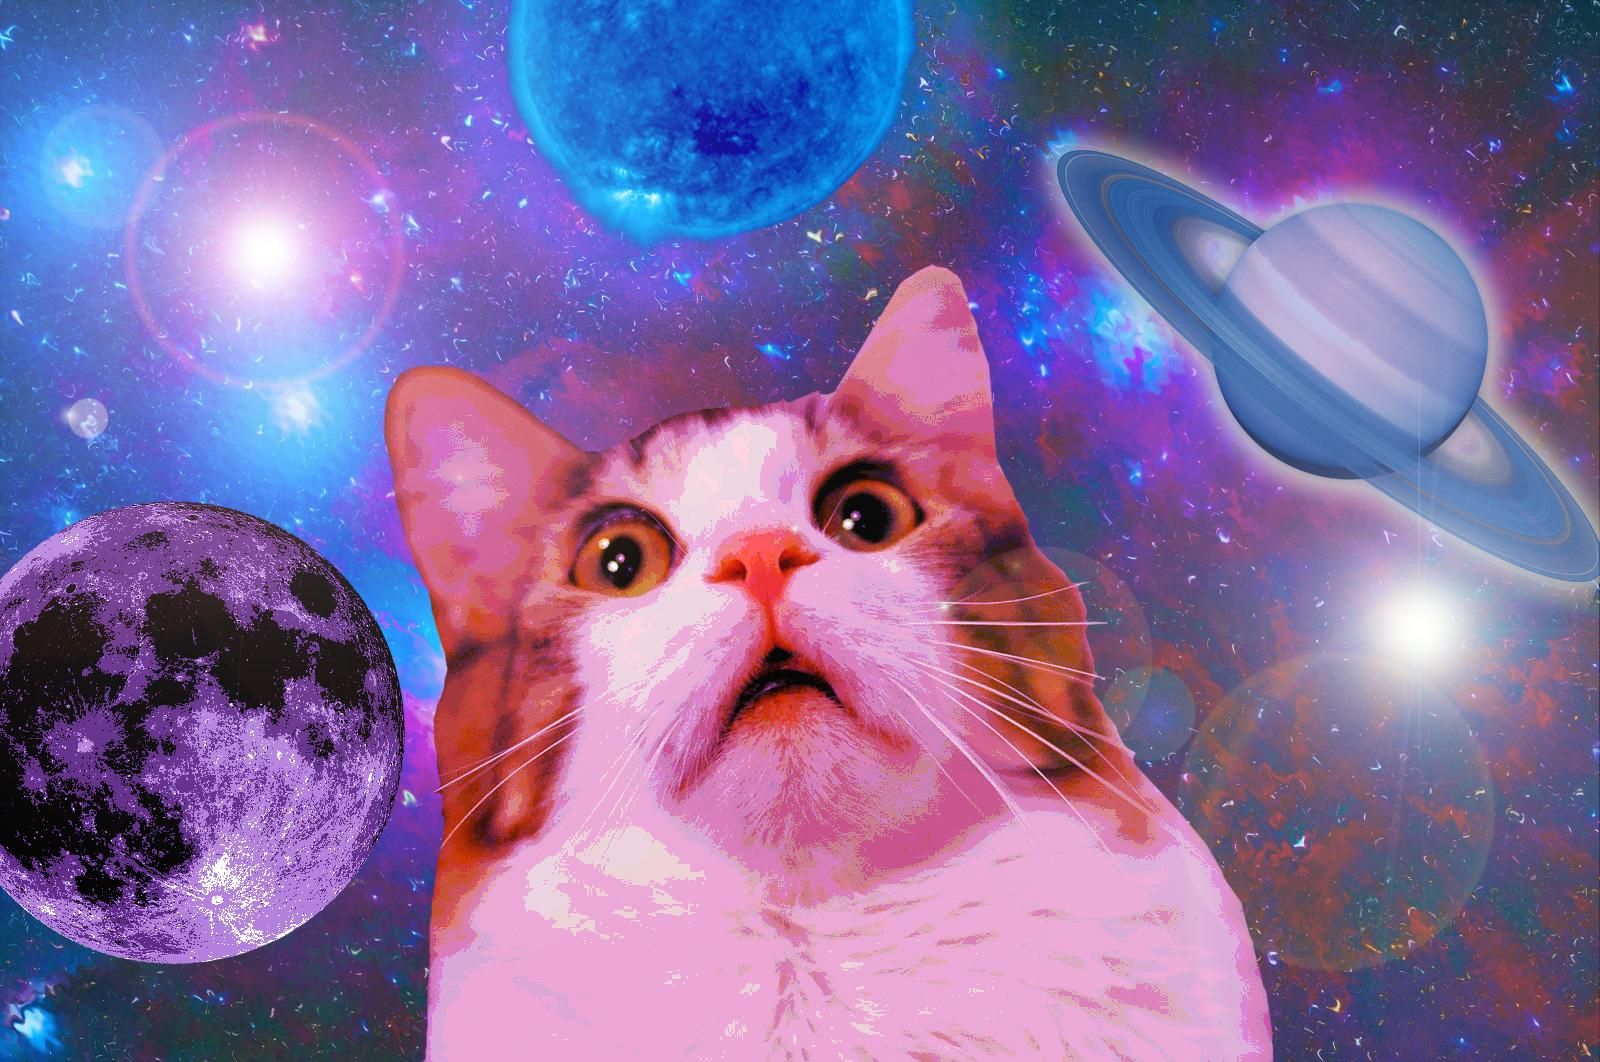 Cats In Space • R Spacecats. モンスターデザイン, ネコ, おもしろネコちゃん